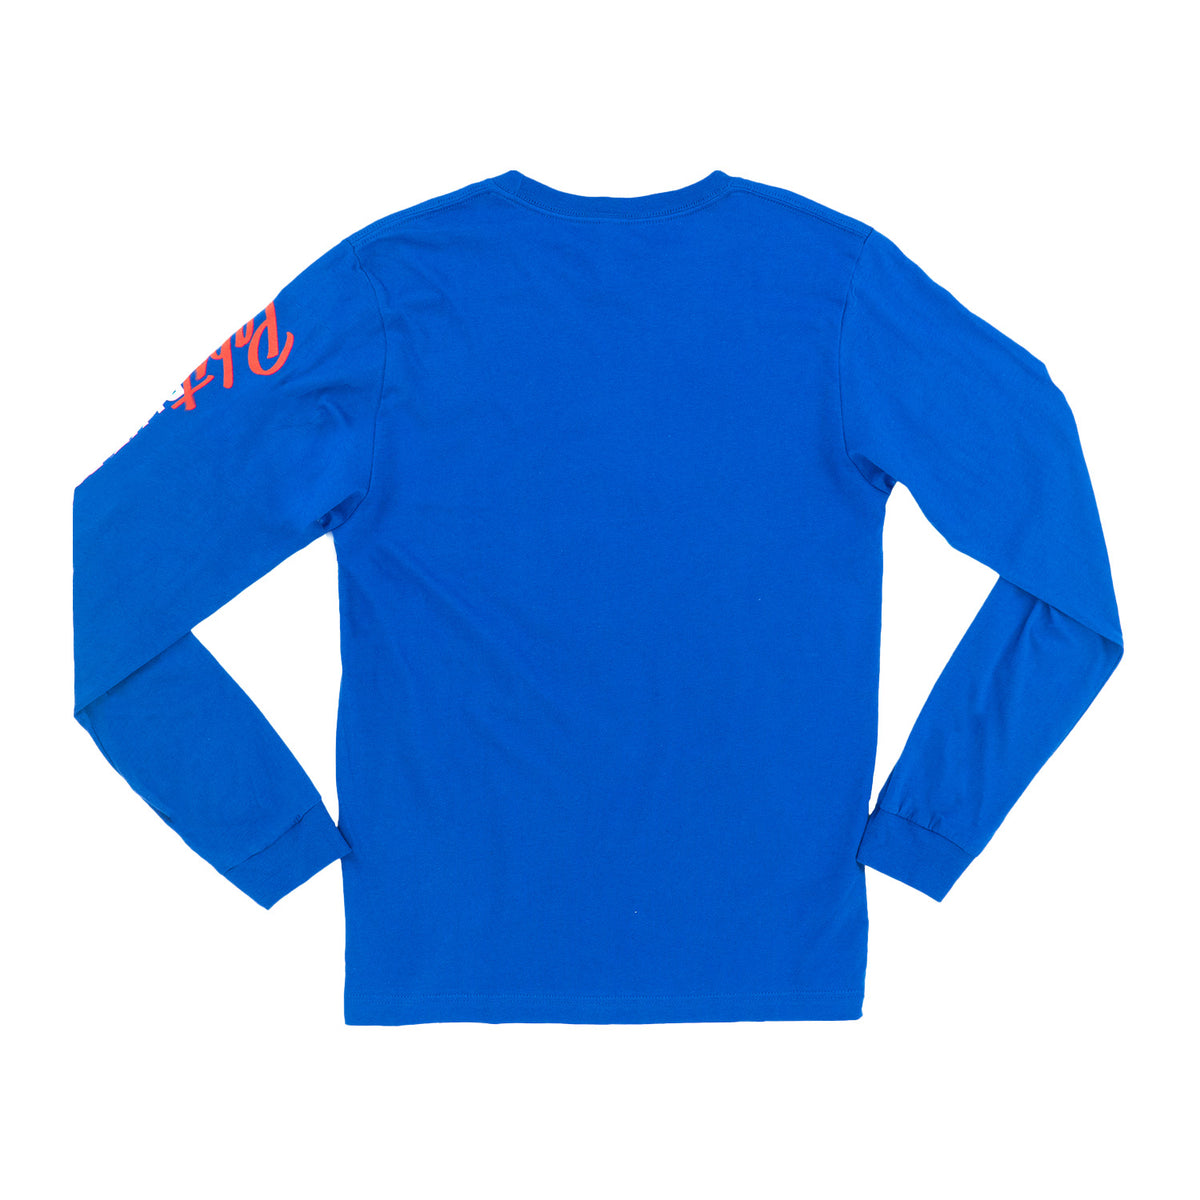 Banner Long Sleeve Tee – Pabst Blue Ribbon Store